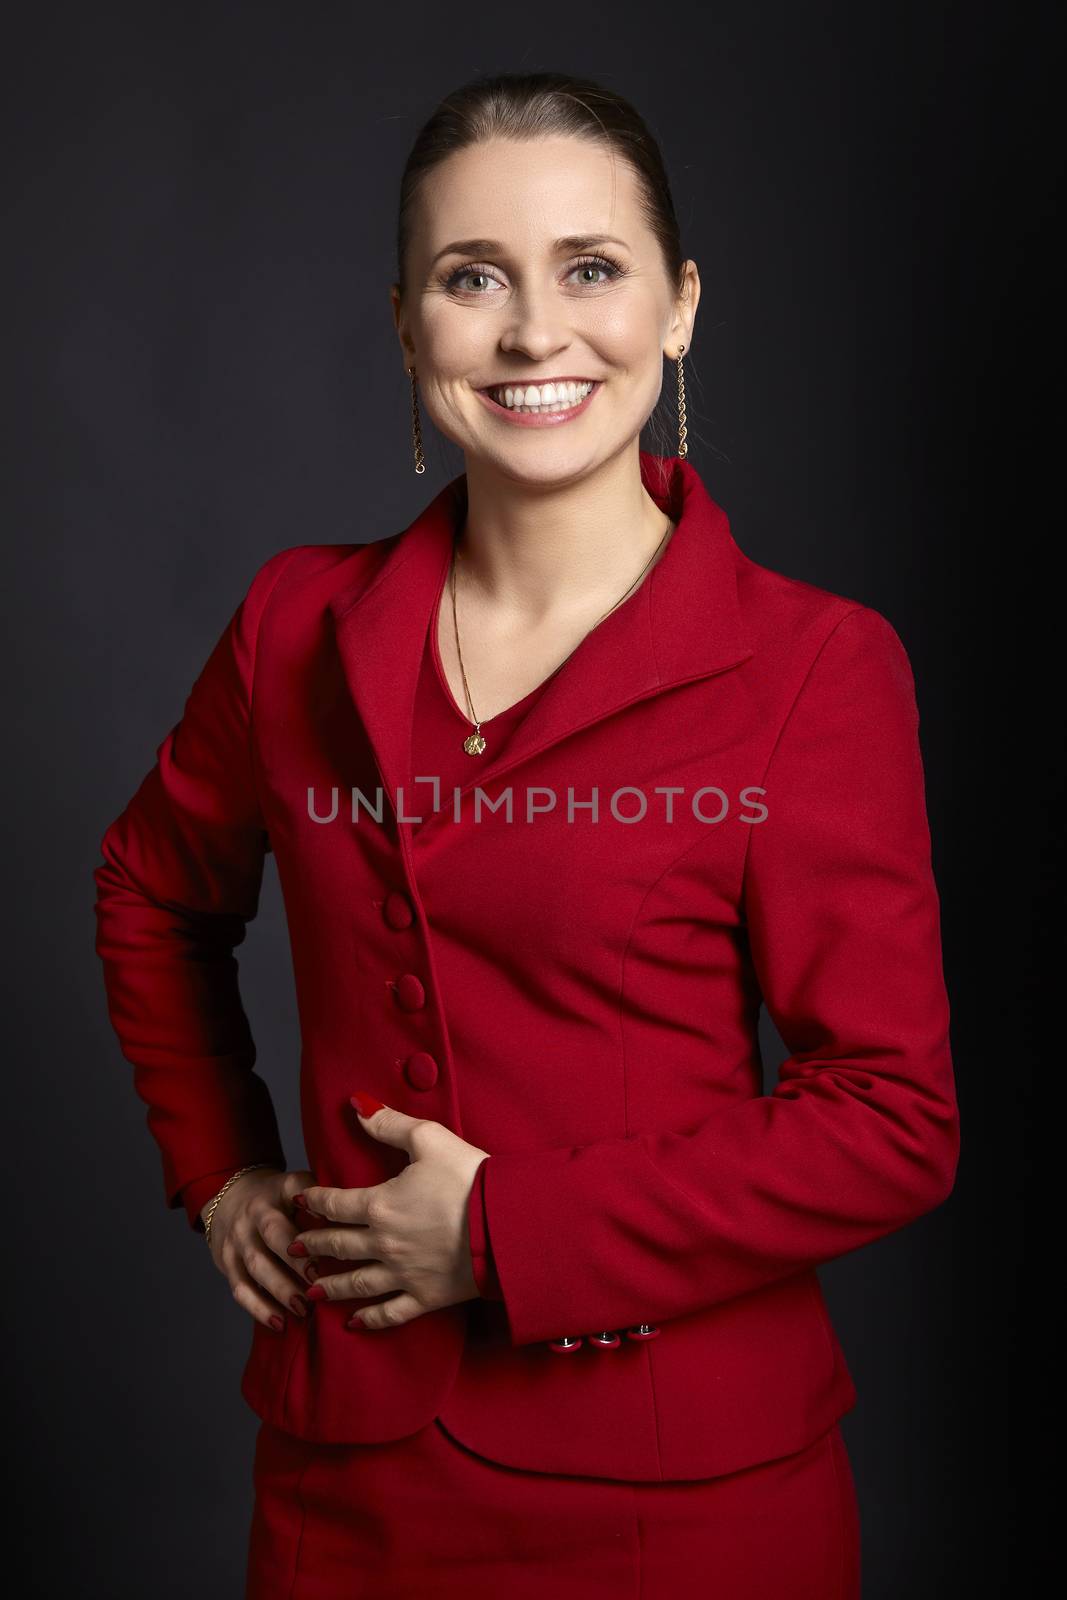 Studio shot of attractive young woman with a sincere smile on black background.